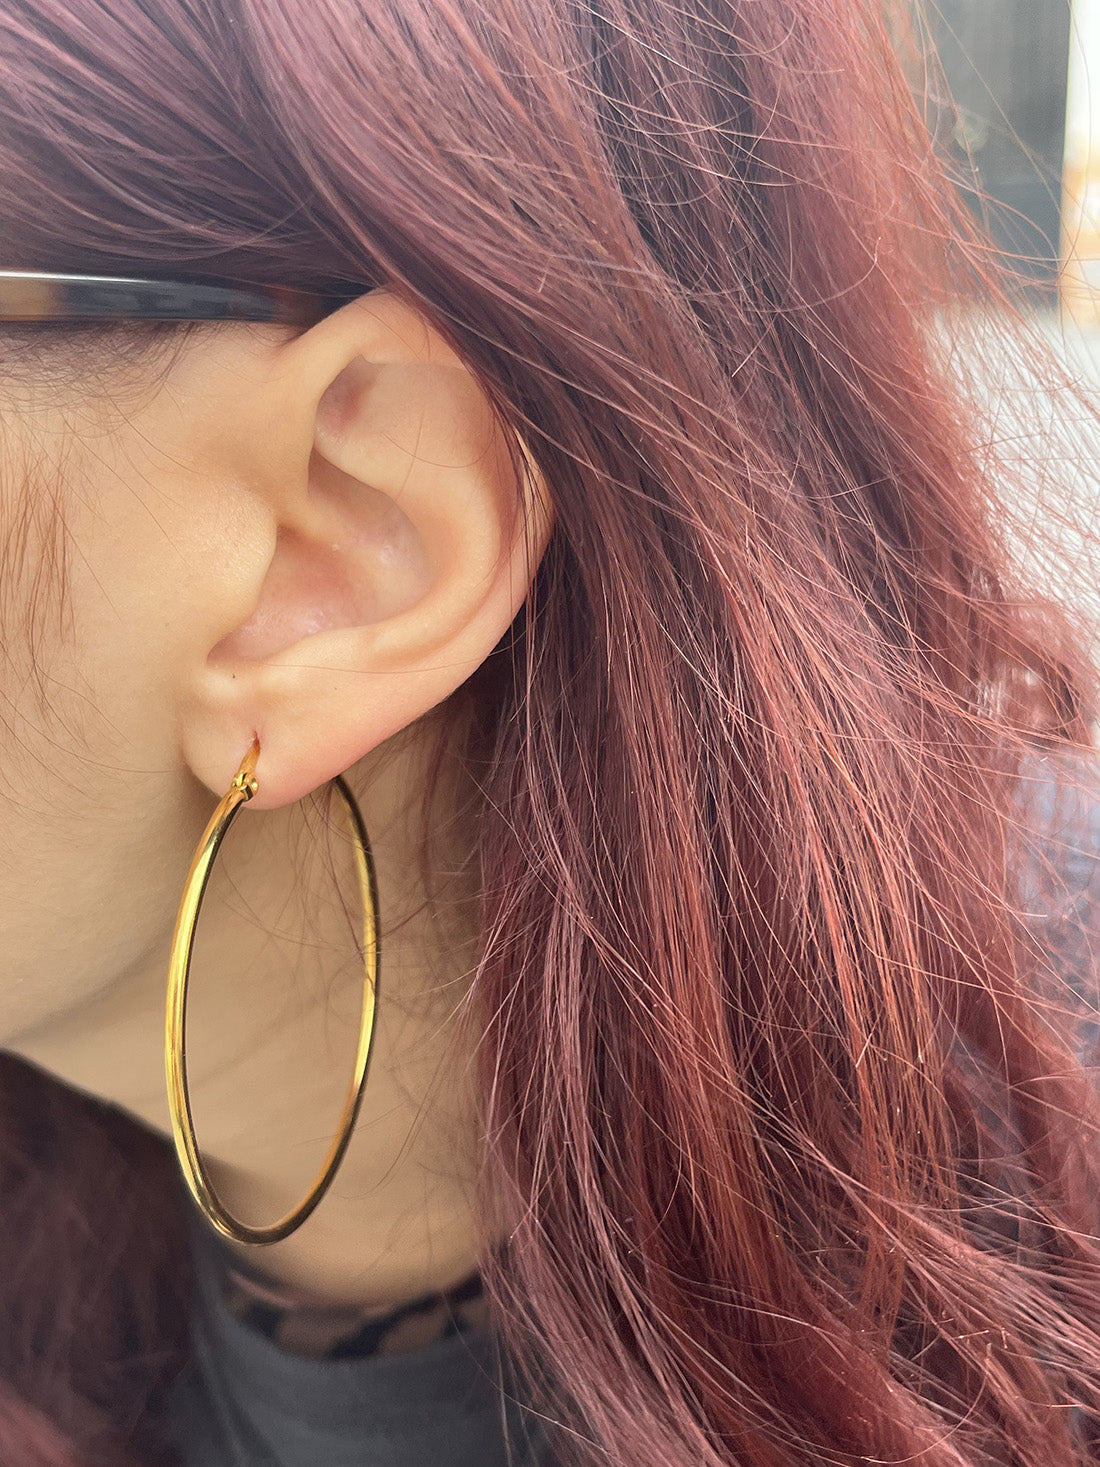 Gold Stainless Steel Hoops